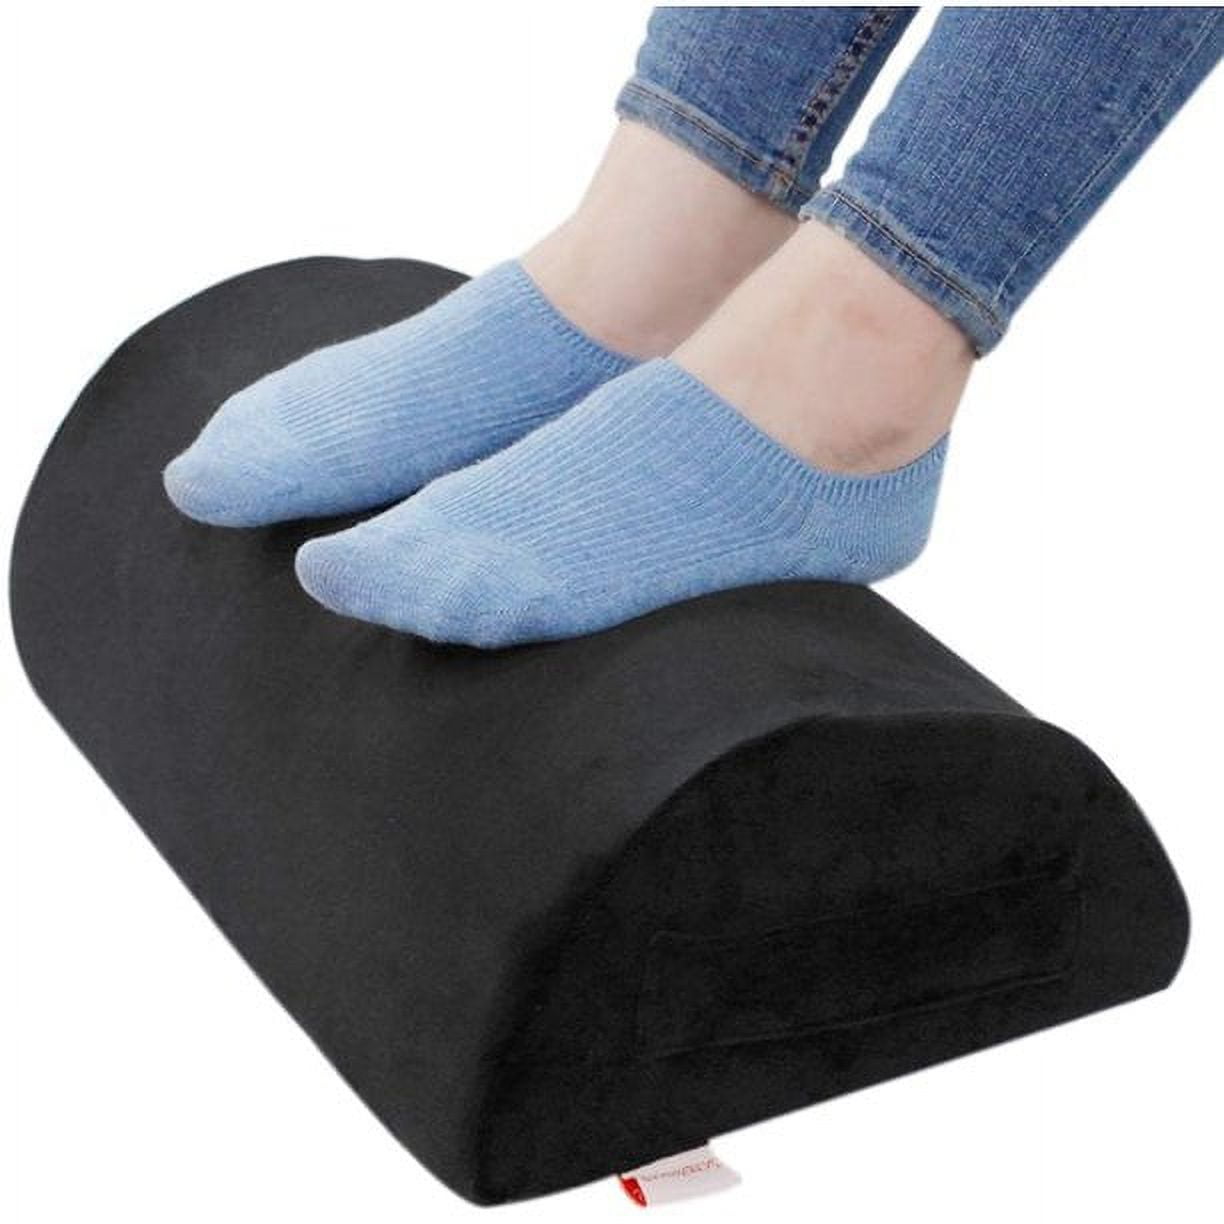 Dropship Foot Rest Under Desk Ergonomic Footrest Cushion ,office Footrest  Pillow Massage to Sell Online at a Lower Price